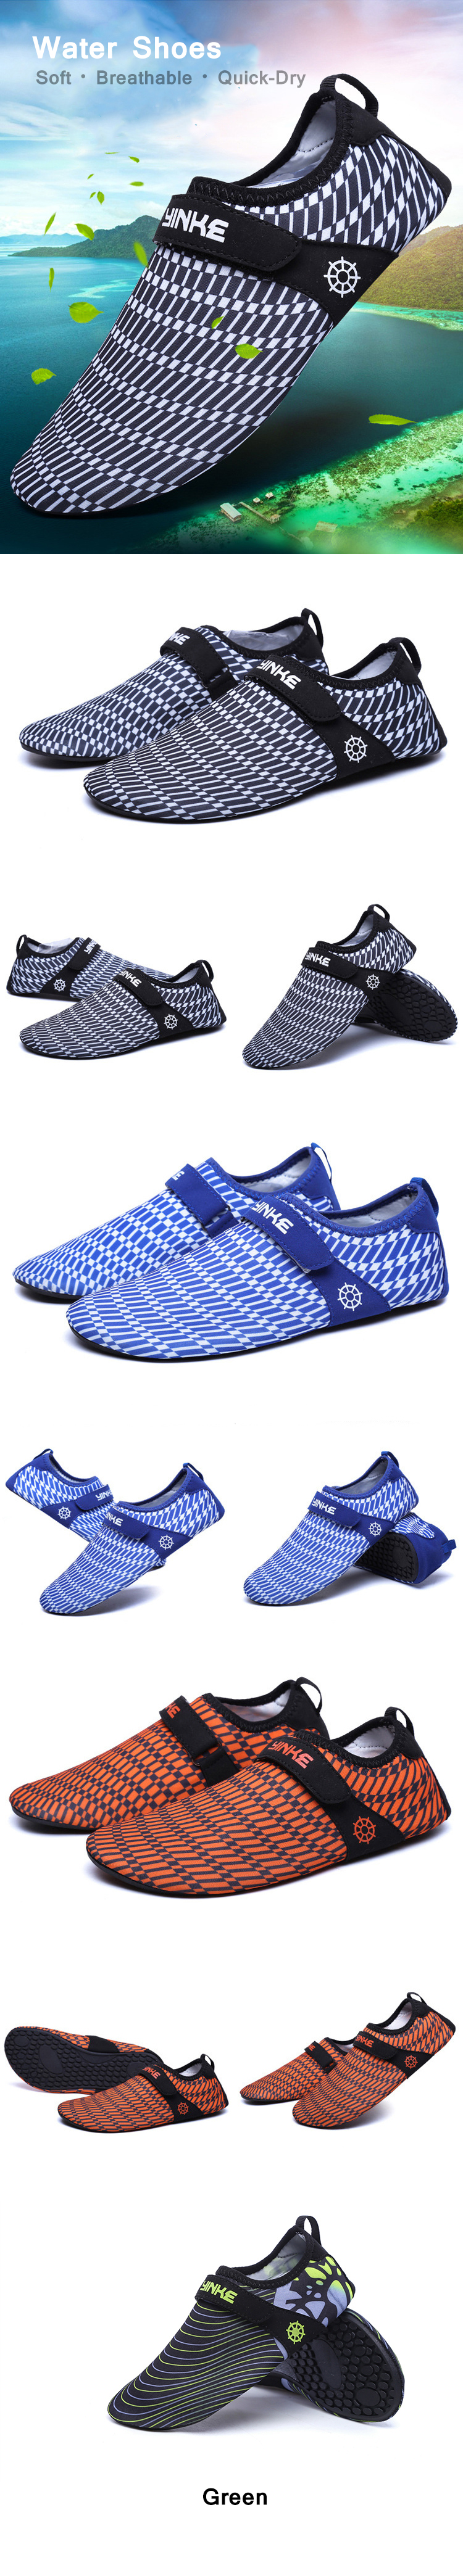 Men-Quick-dry-Breathable-Swim-Snorkeling-Beach-Shoes-Barefoot-Slip-on-Walking-Hiking-Shoes-1340316